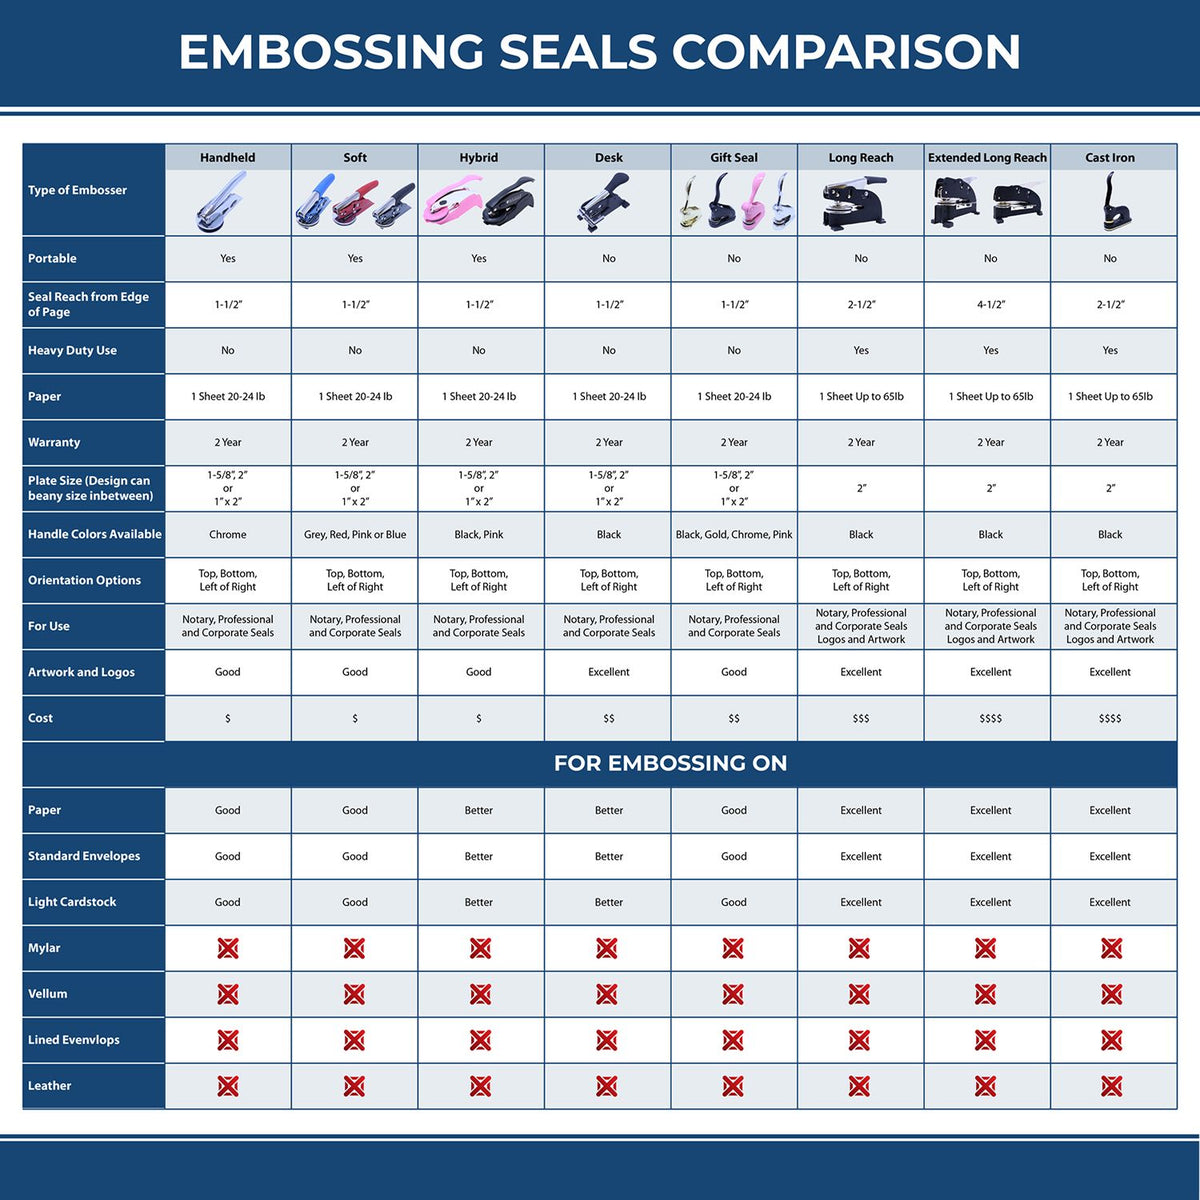 A comparison chart for the different types of mount models available for the Hybrid Michigan Architect Seal